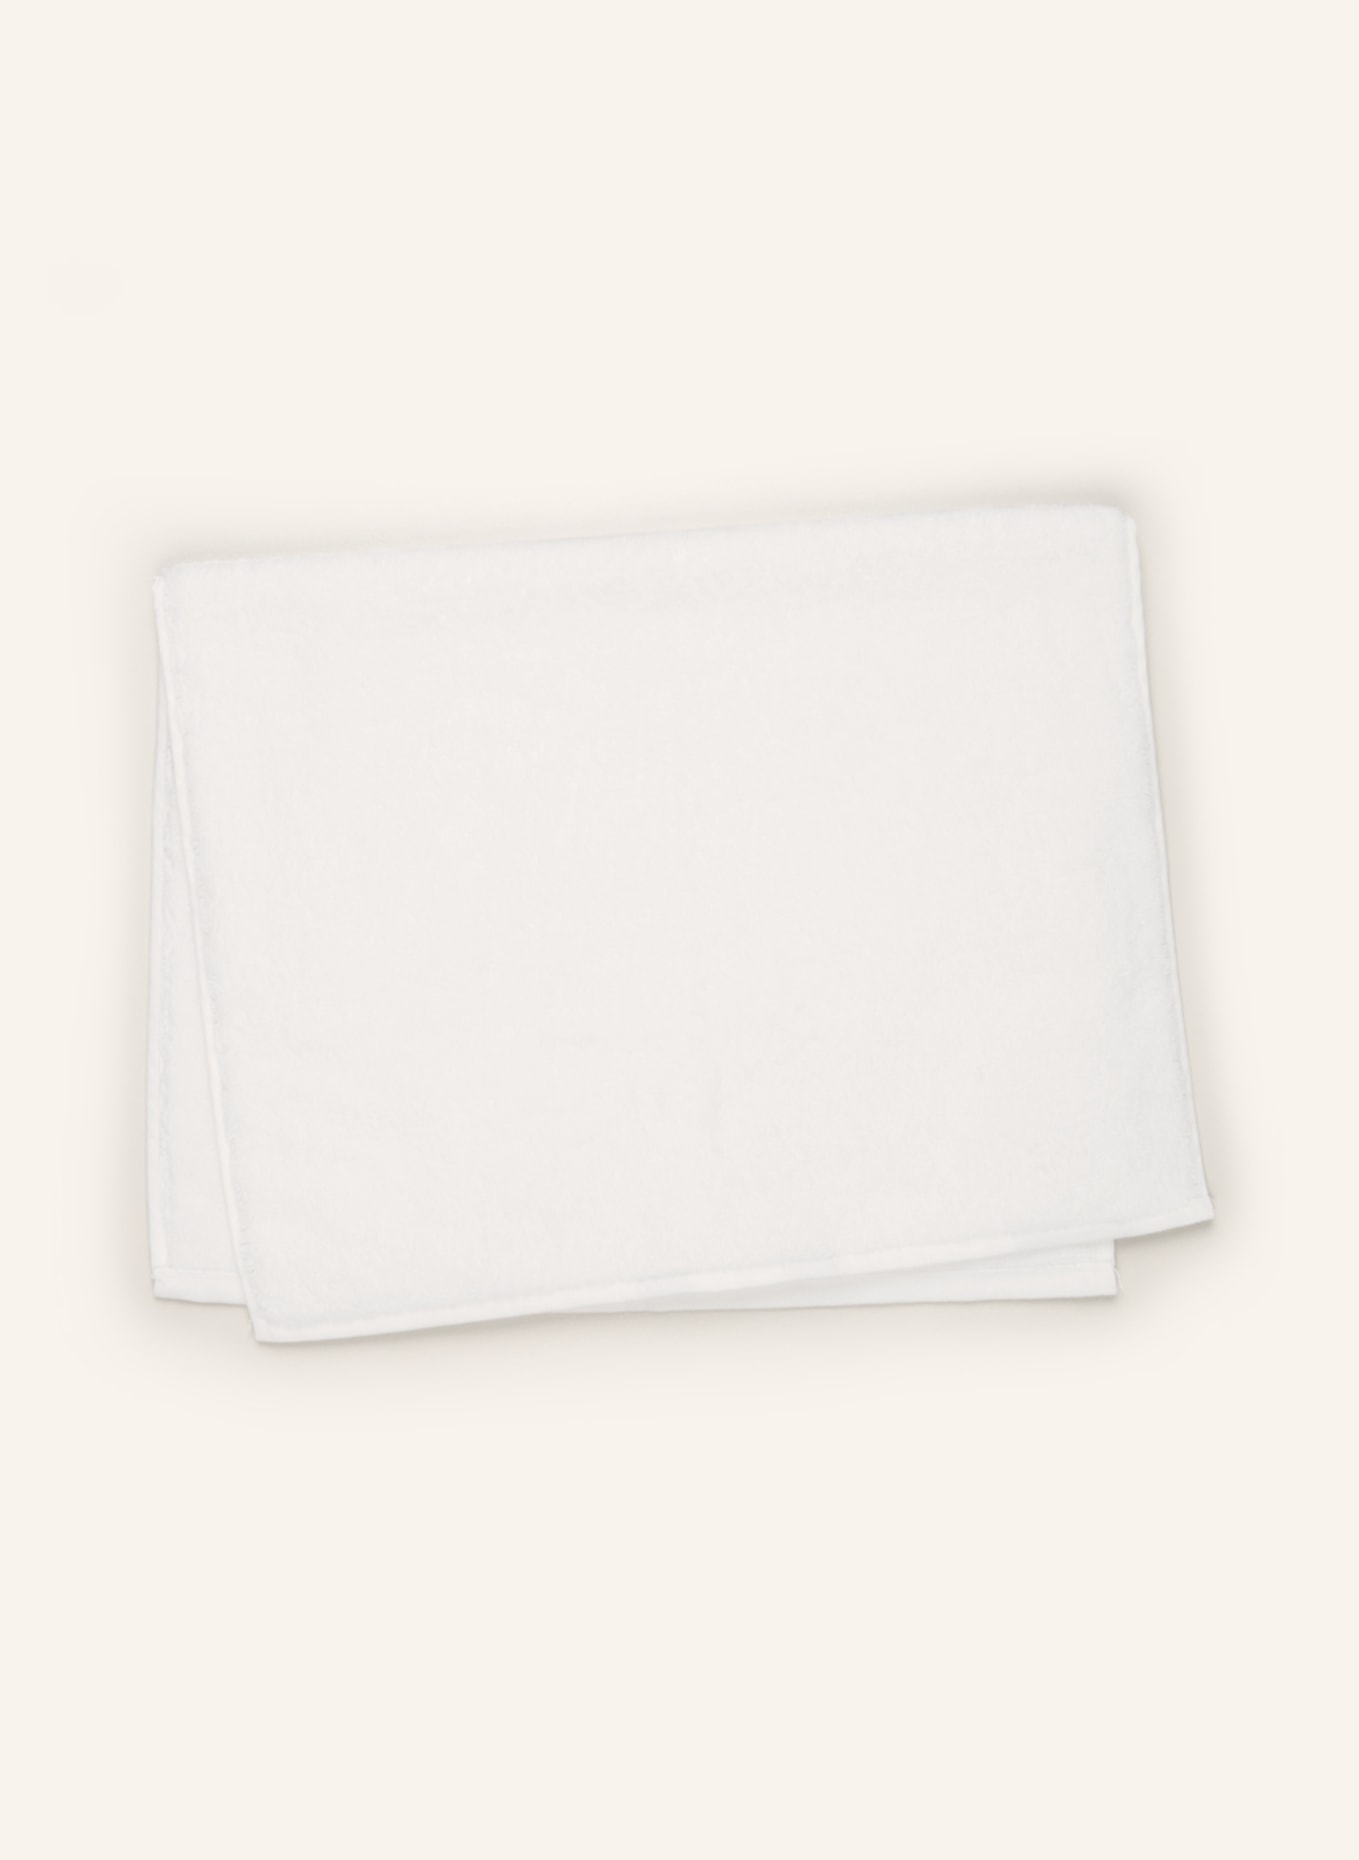 weseta switzerland Guest towel DREAM ROYAL, Color: 01 WEISS (Image 2)